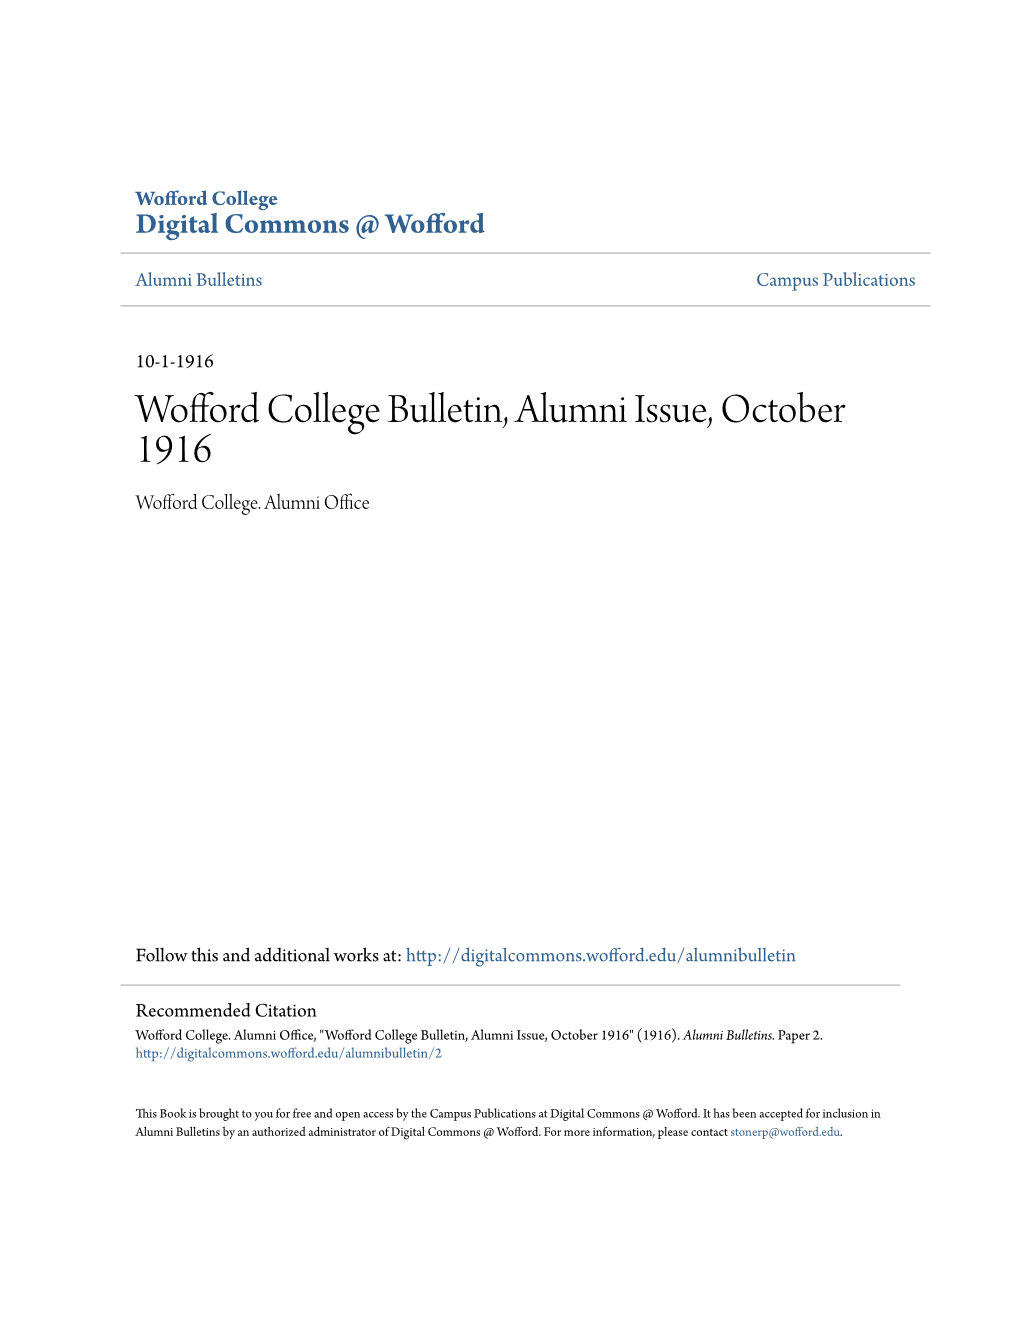 Wofford College Bulletin, Alumni Issue, October 1916 Wofford College